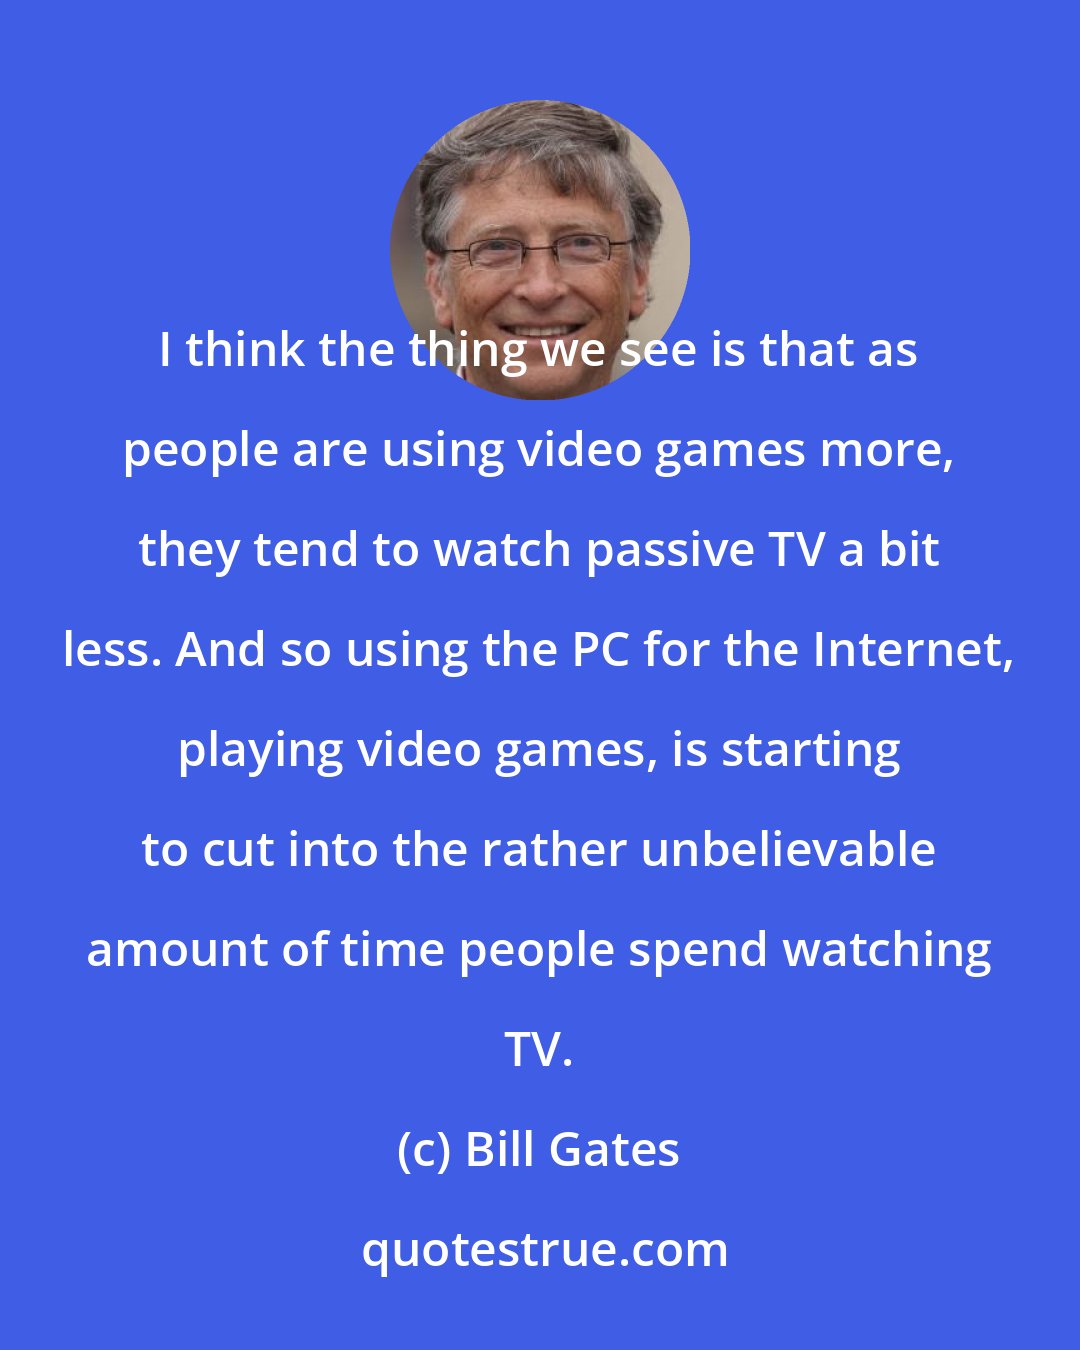 Bill Gates: I think the thing we see is that as people are using video games more, they tend to watch passive TV a bit less. And so using the PC for the Internet, playing video games, is starting to cut into the rather unbelievable amount of time people spend watching TV.